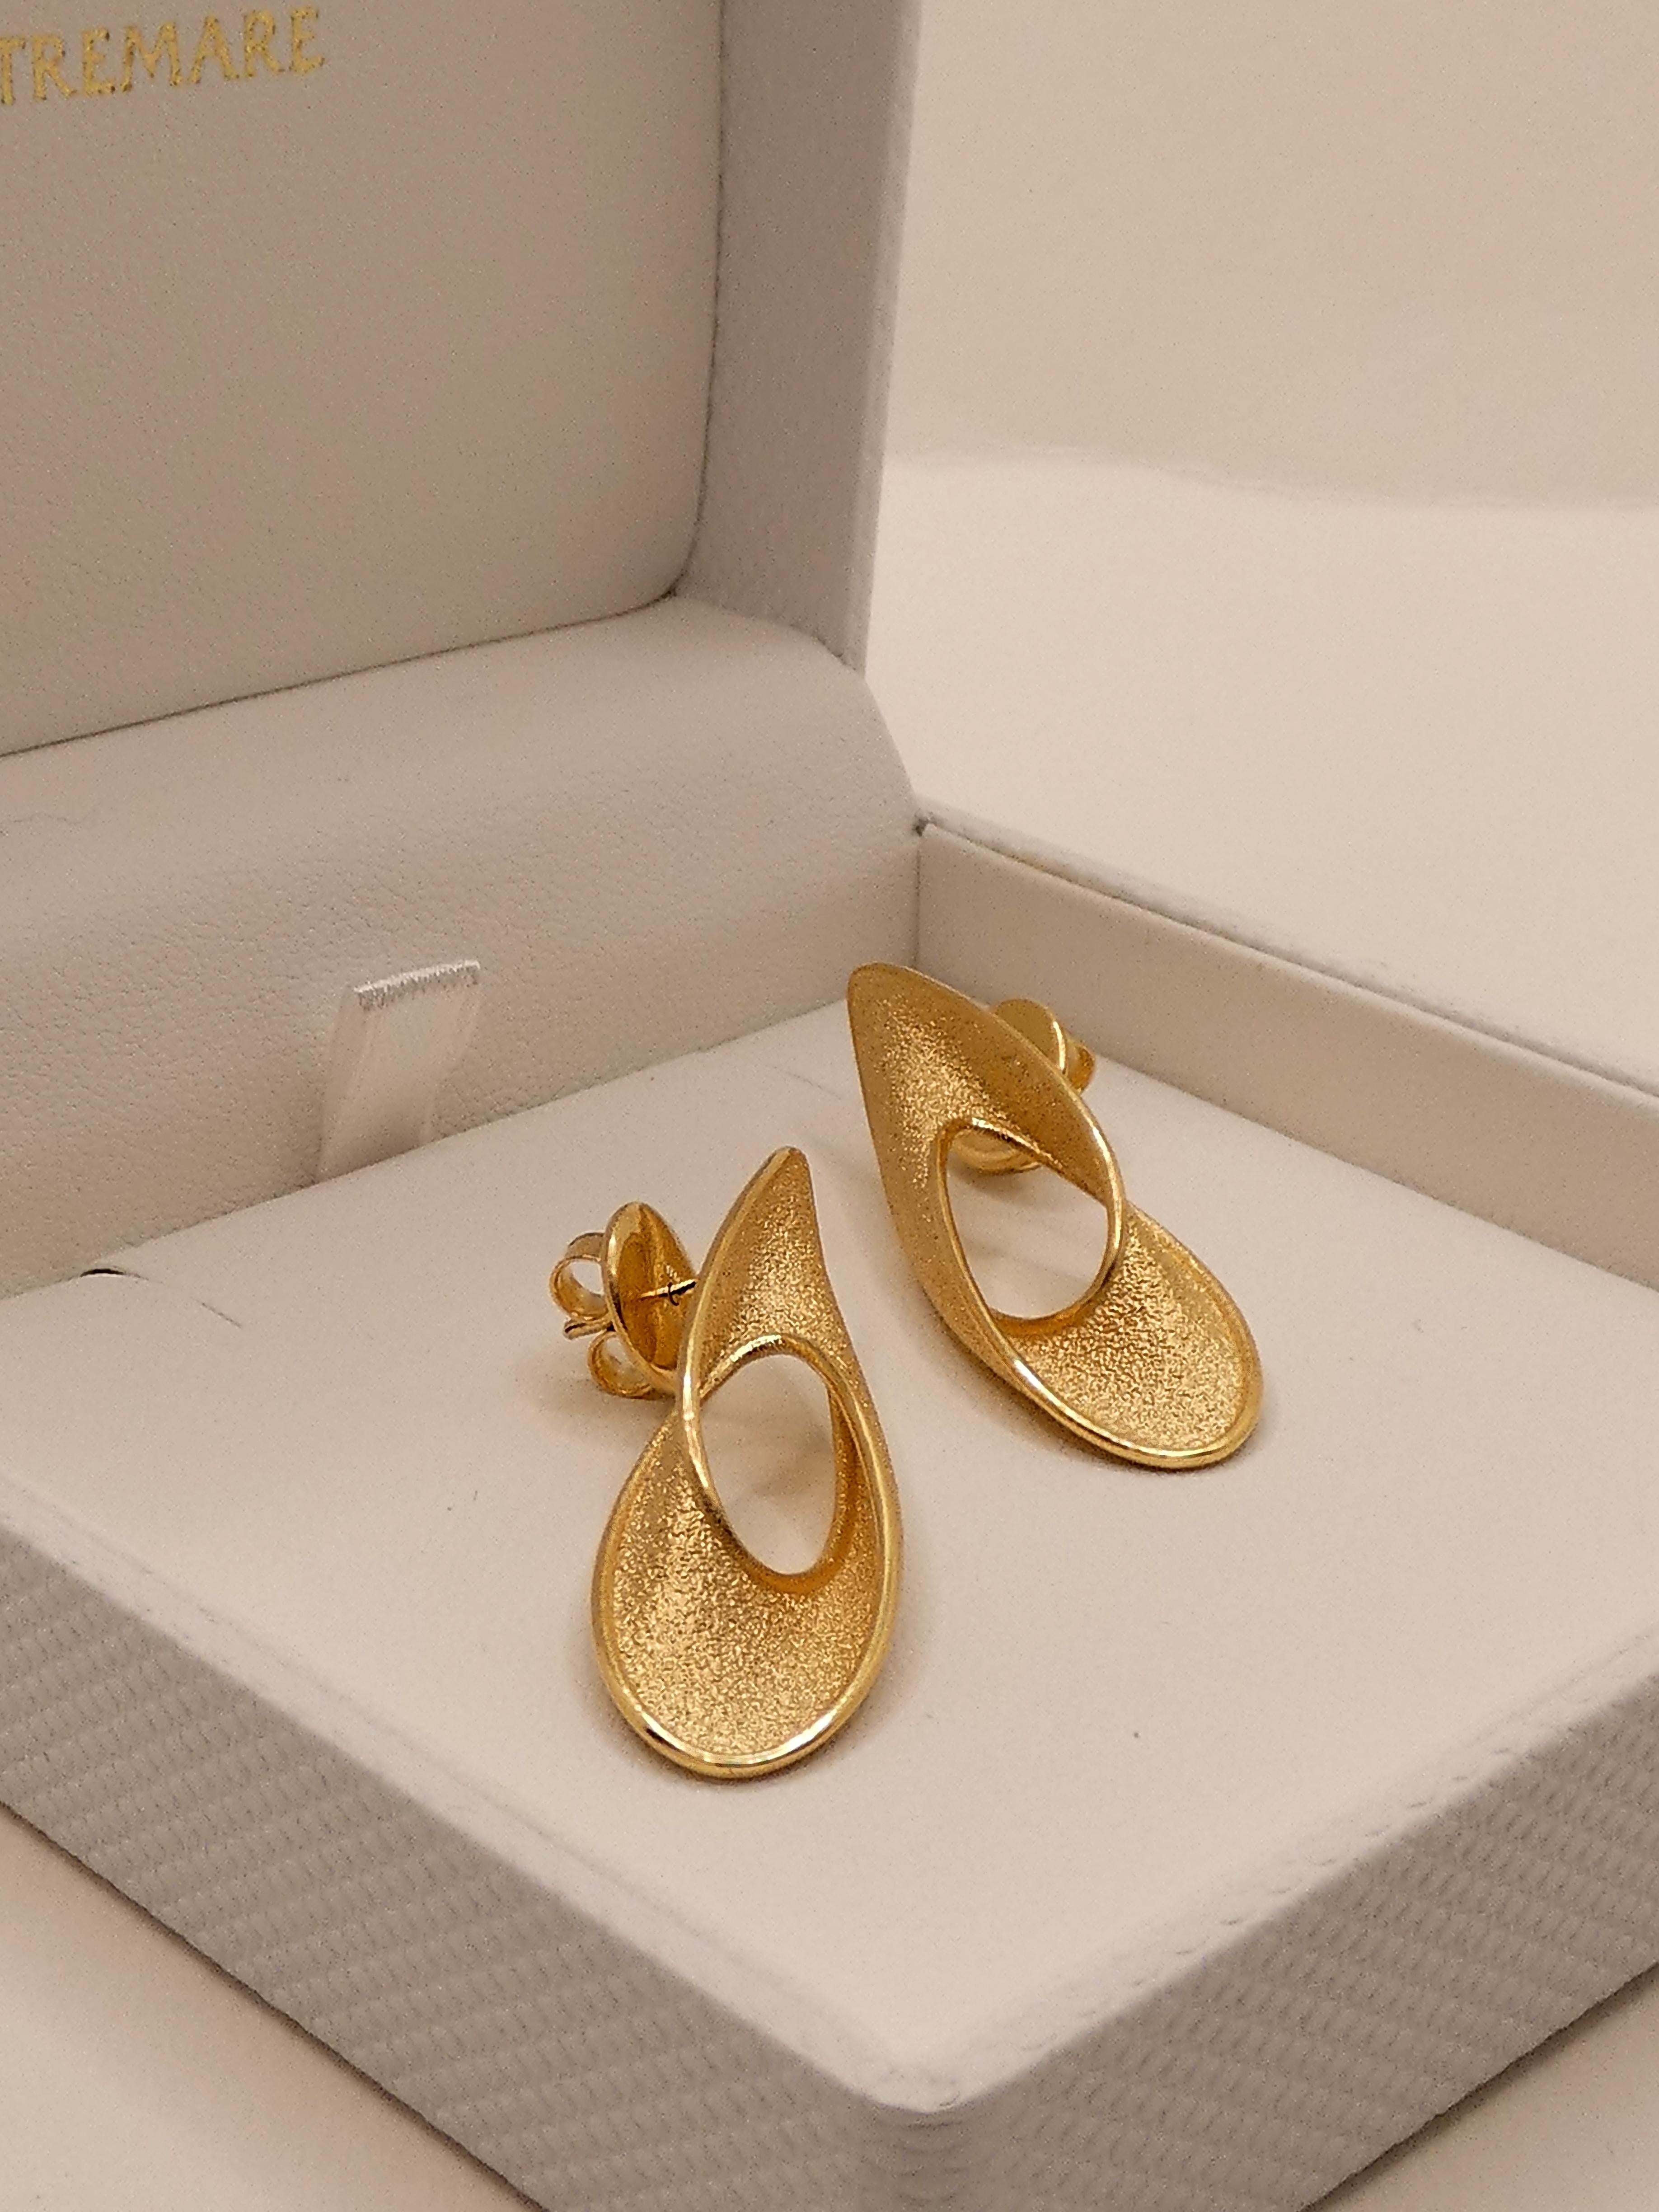 Statement Gold Earrings in 14k Solid Gold, Made in Italy Fine Jewelry For Sale 2